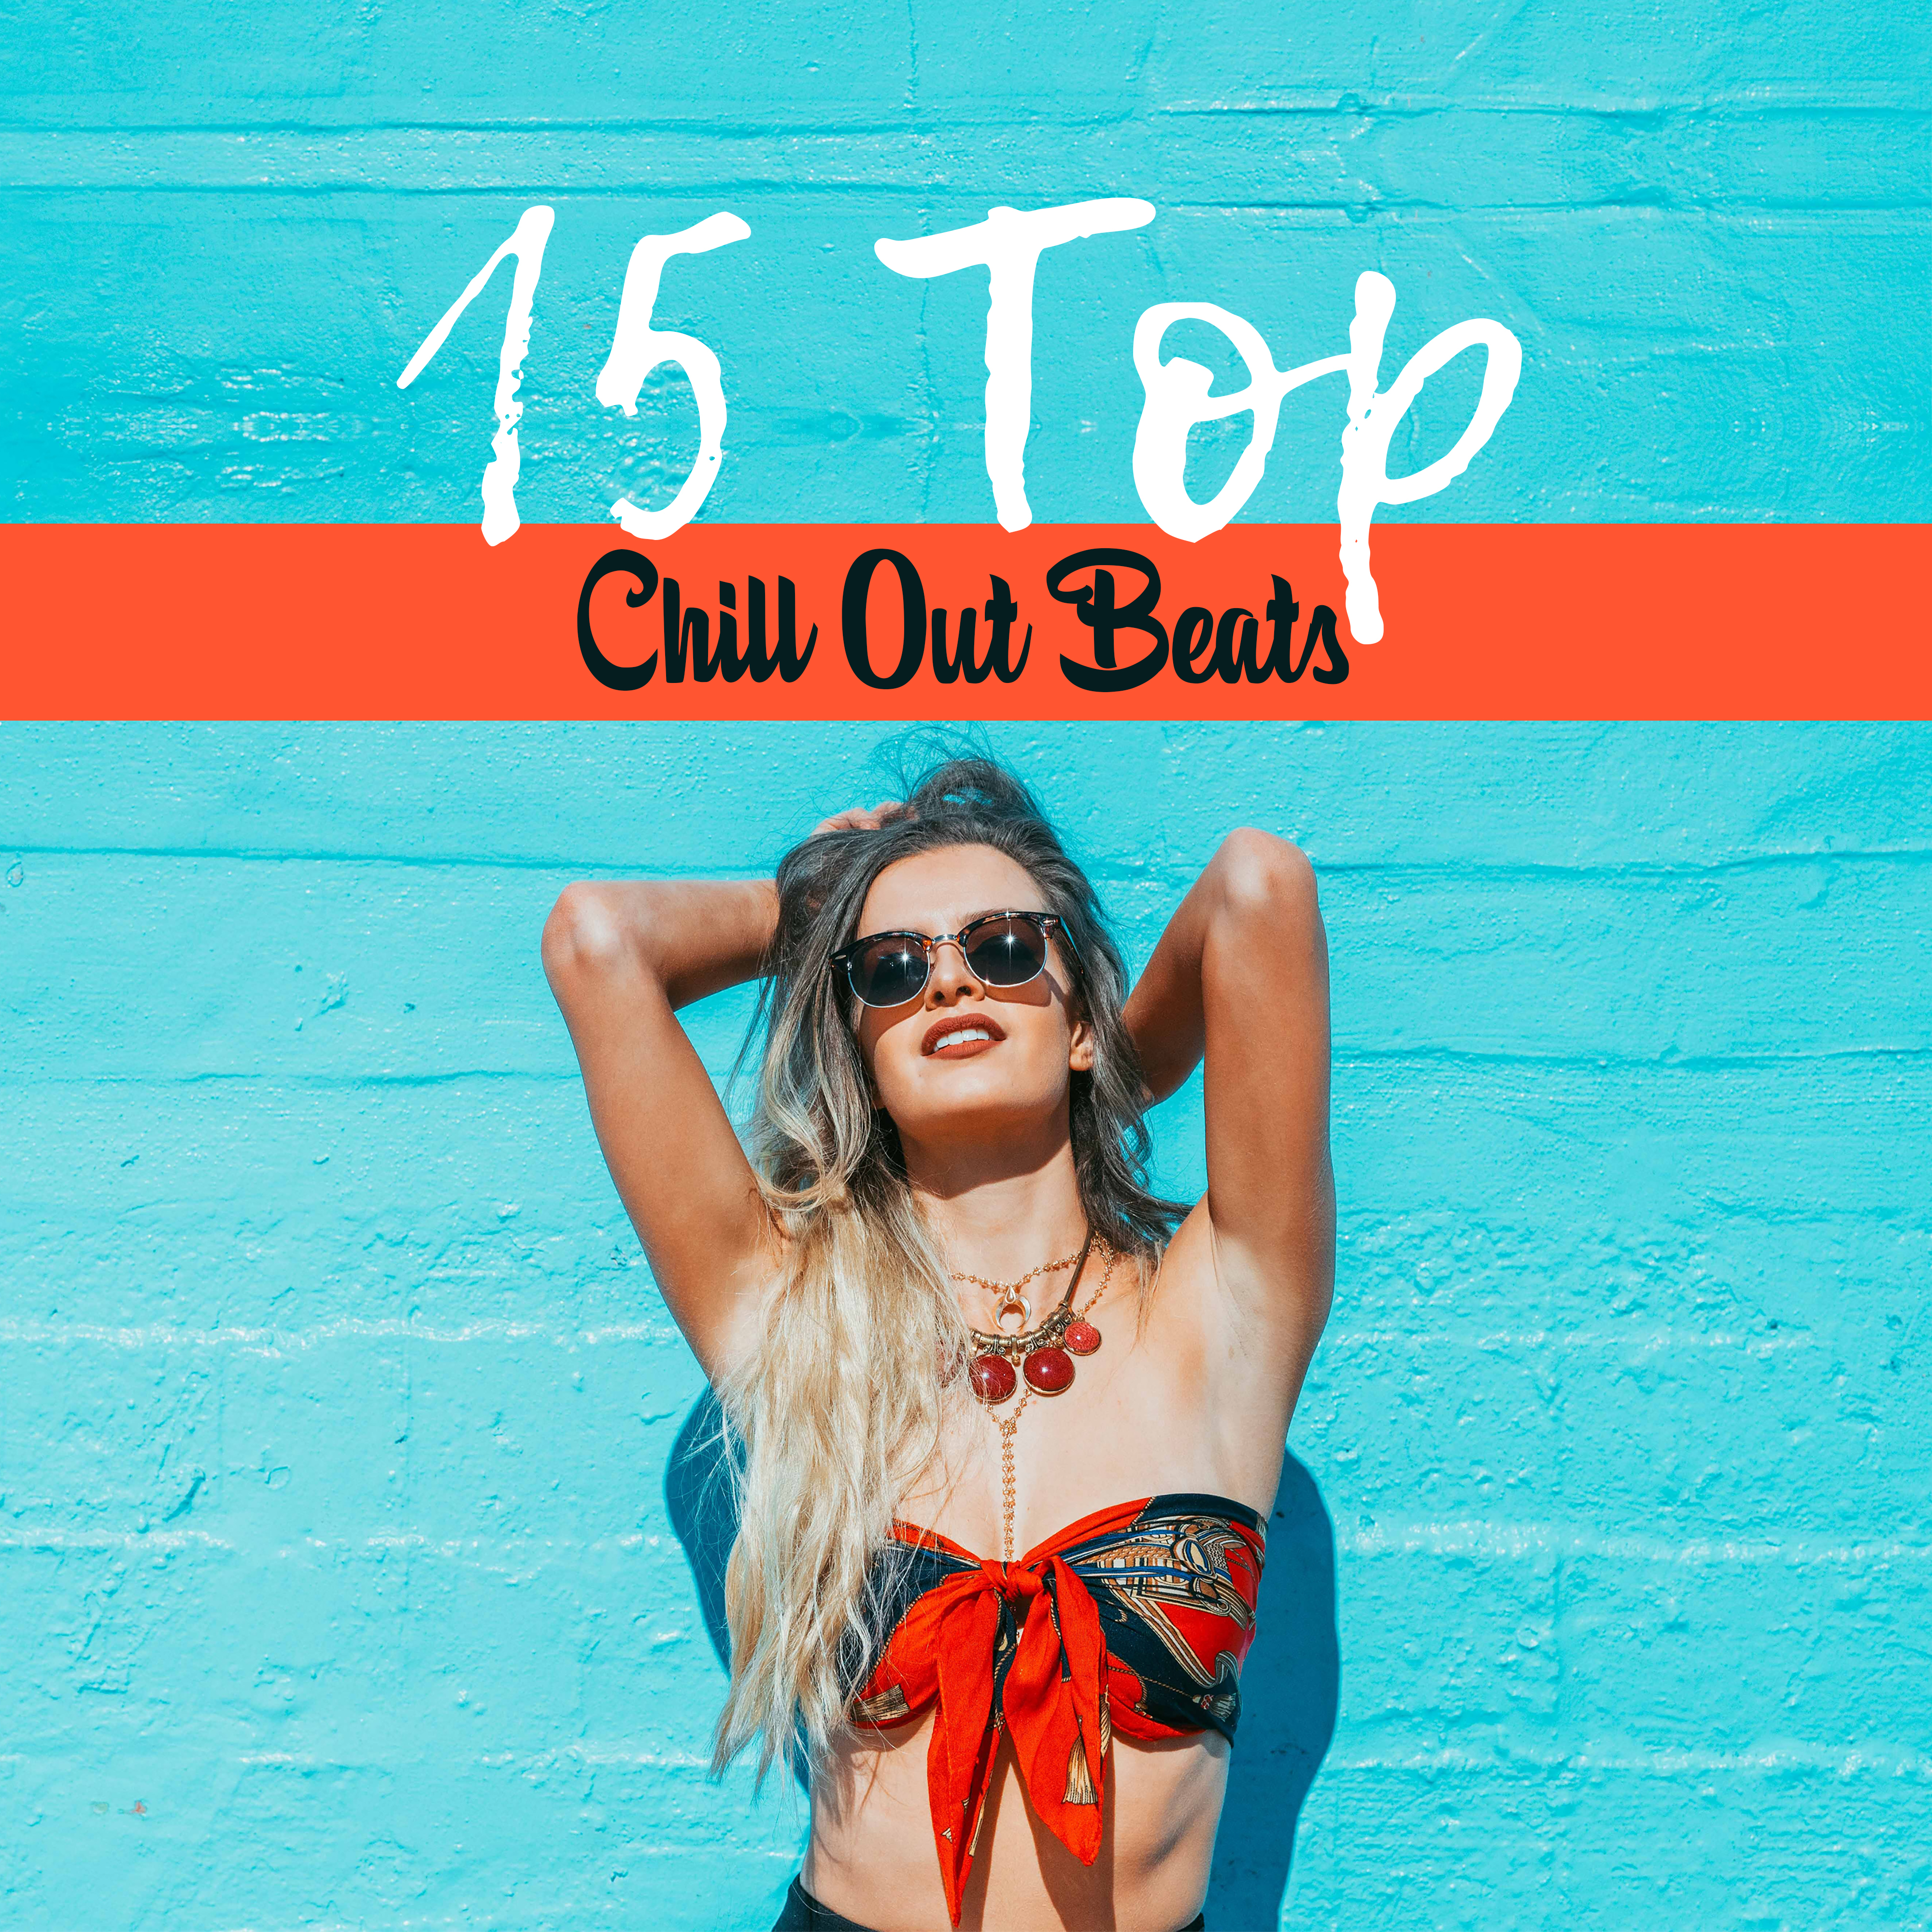 15 Top Chill Out Beats – Mega Chill Out Collection 2017, Relax & Chill, Summer Vibes